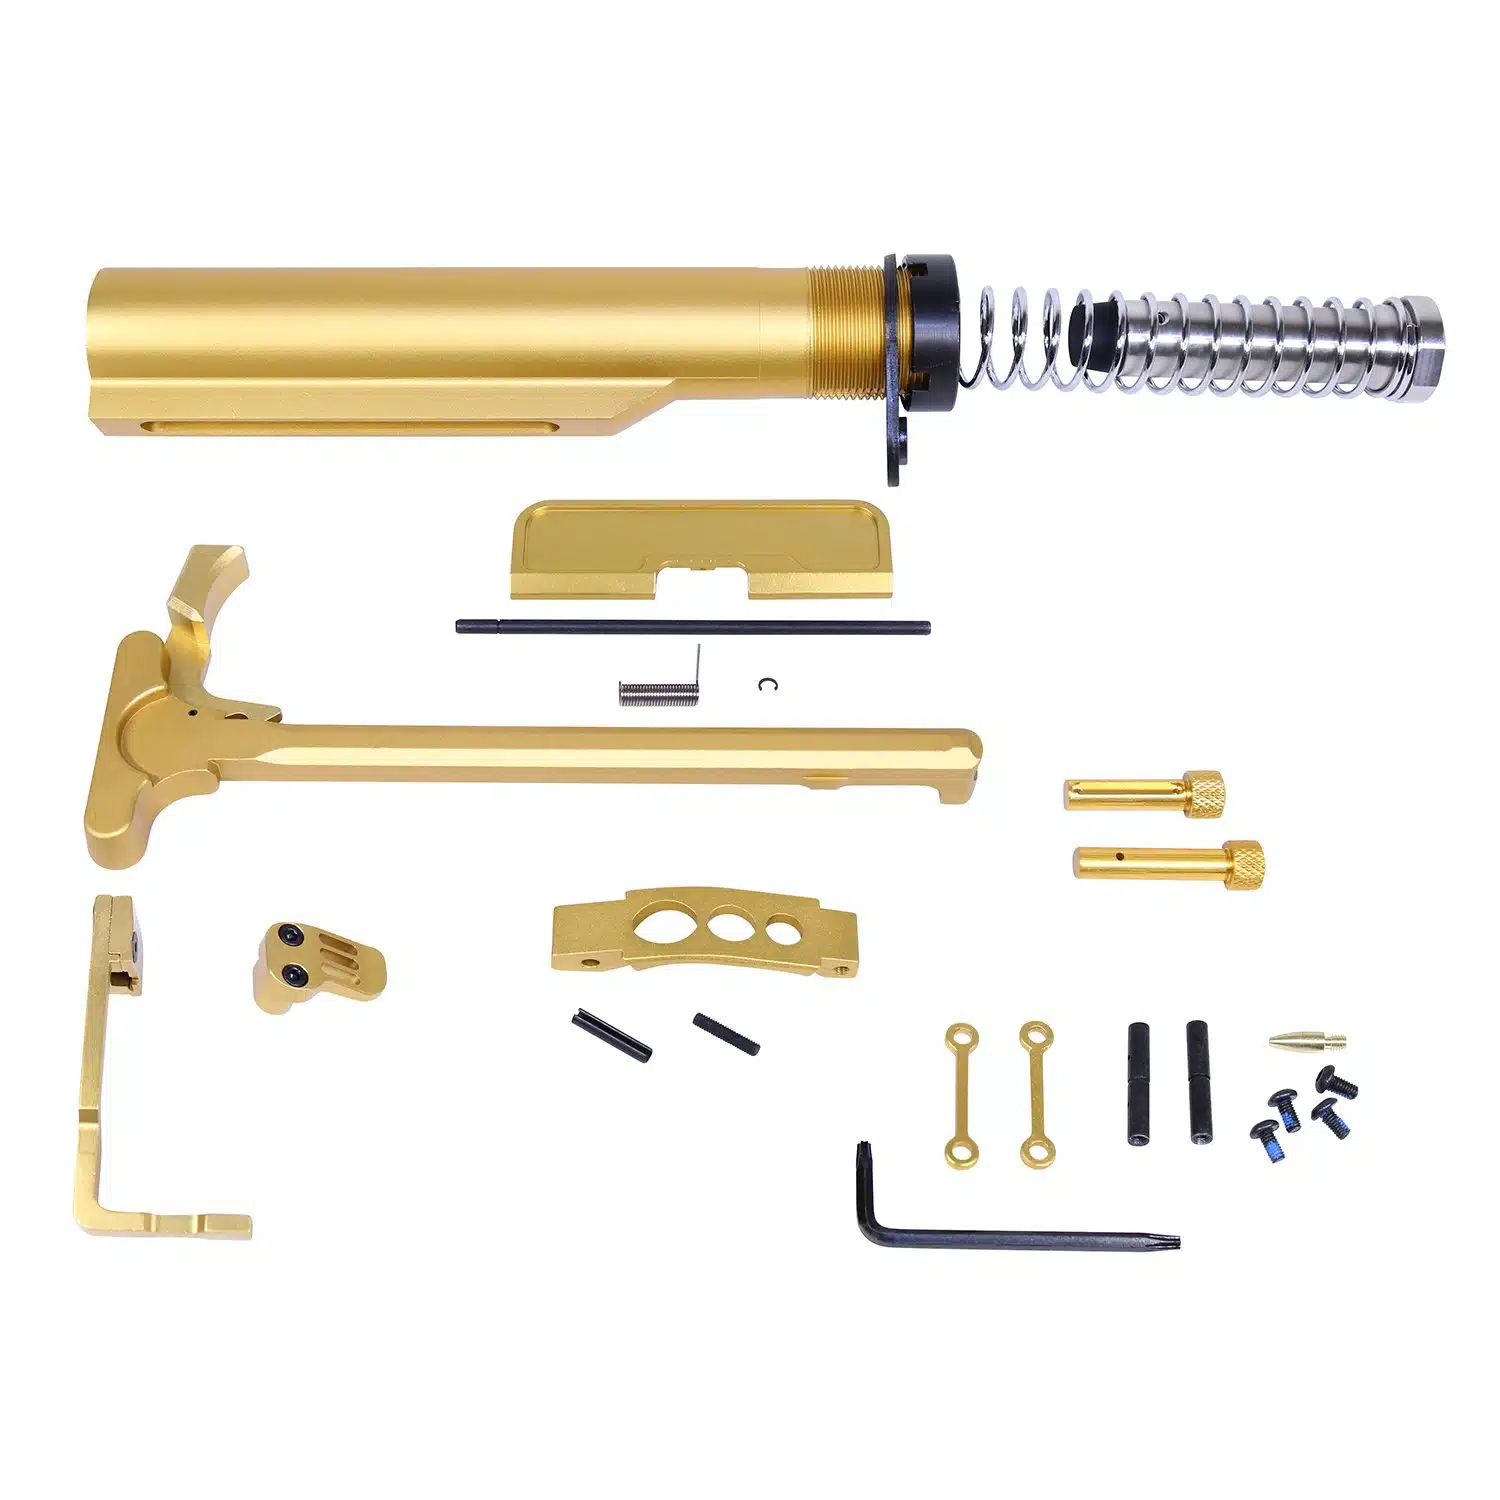 AR-15 Complete Accessory Kit in Anodized Gold